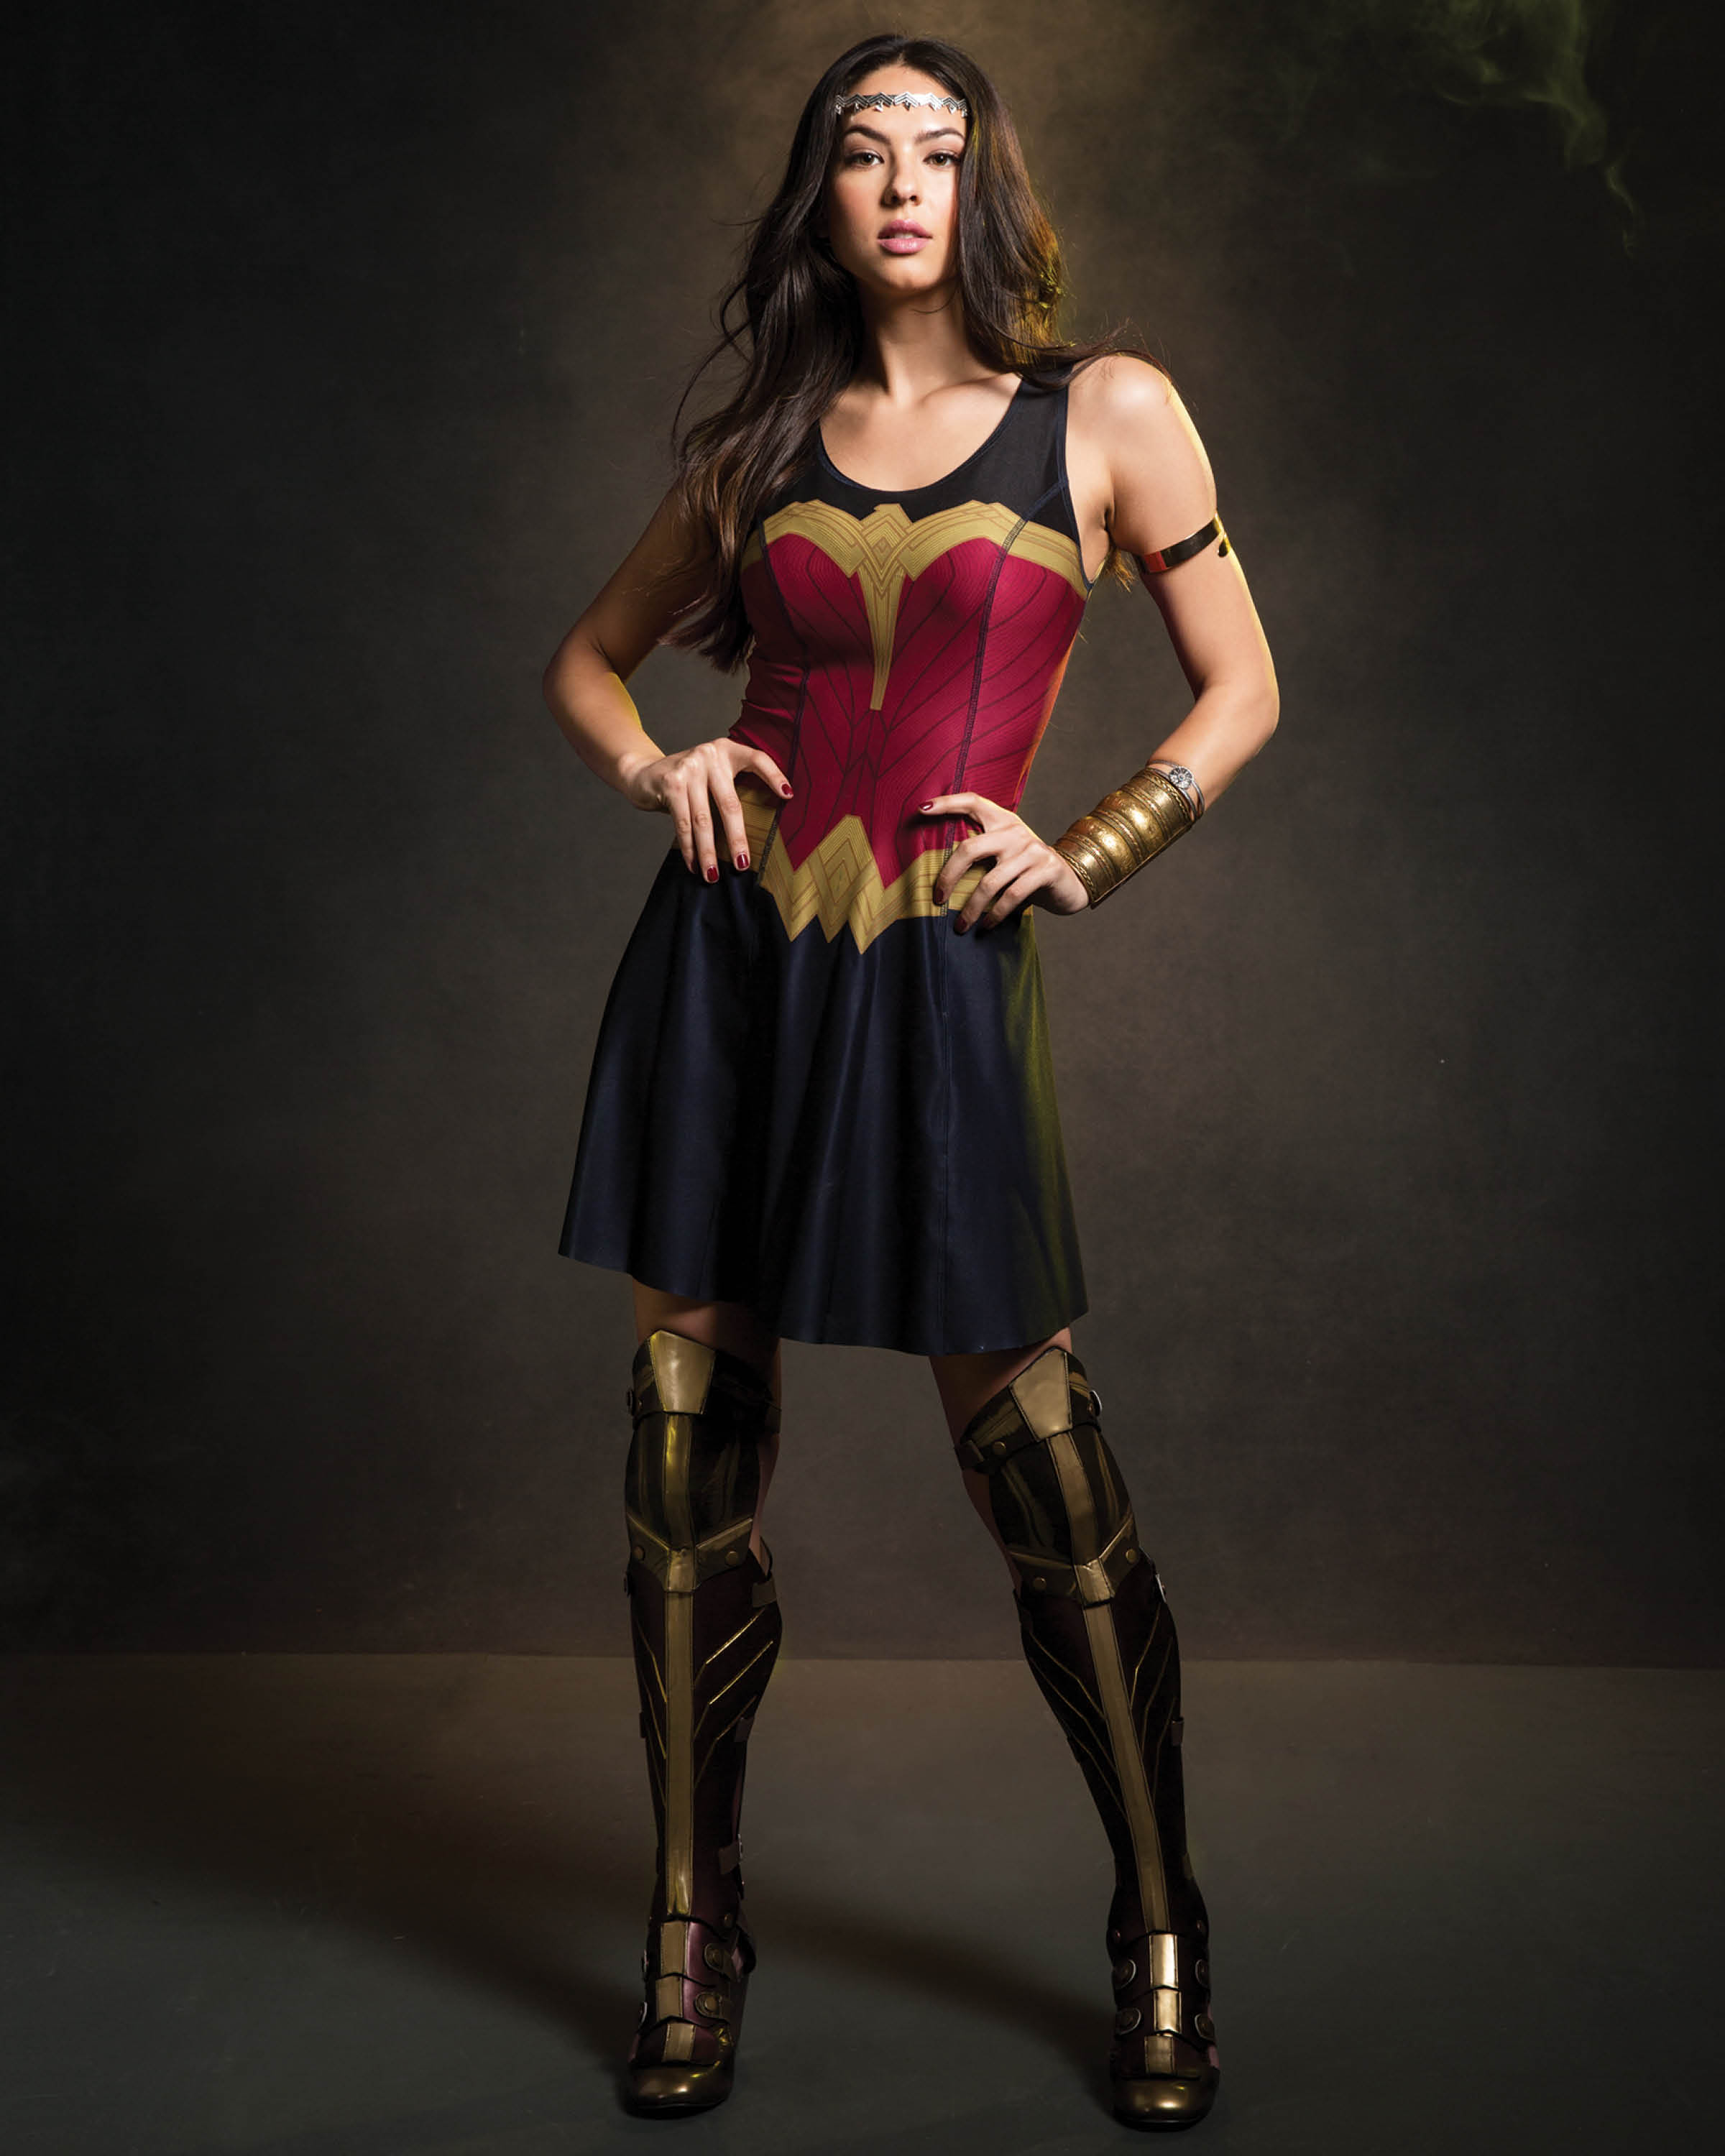 Her Universe and Hot Topic Launch New Wonder Woman-inspired Fashion Collection